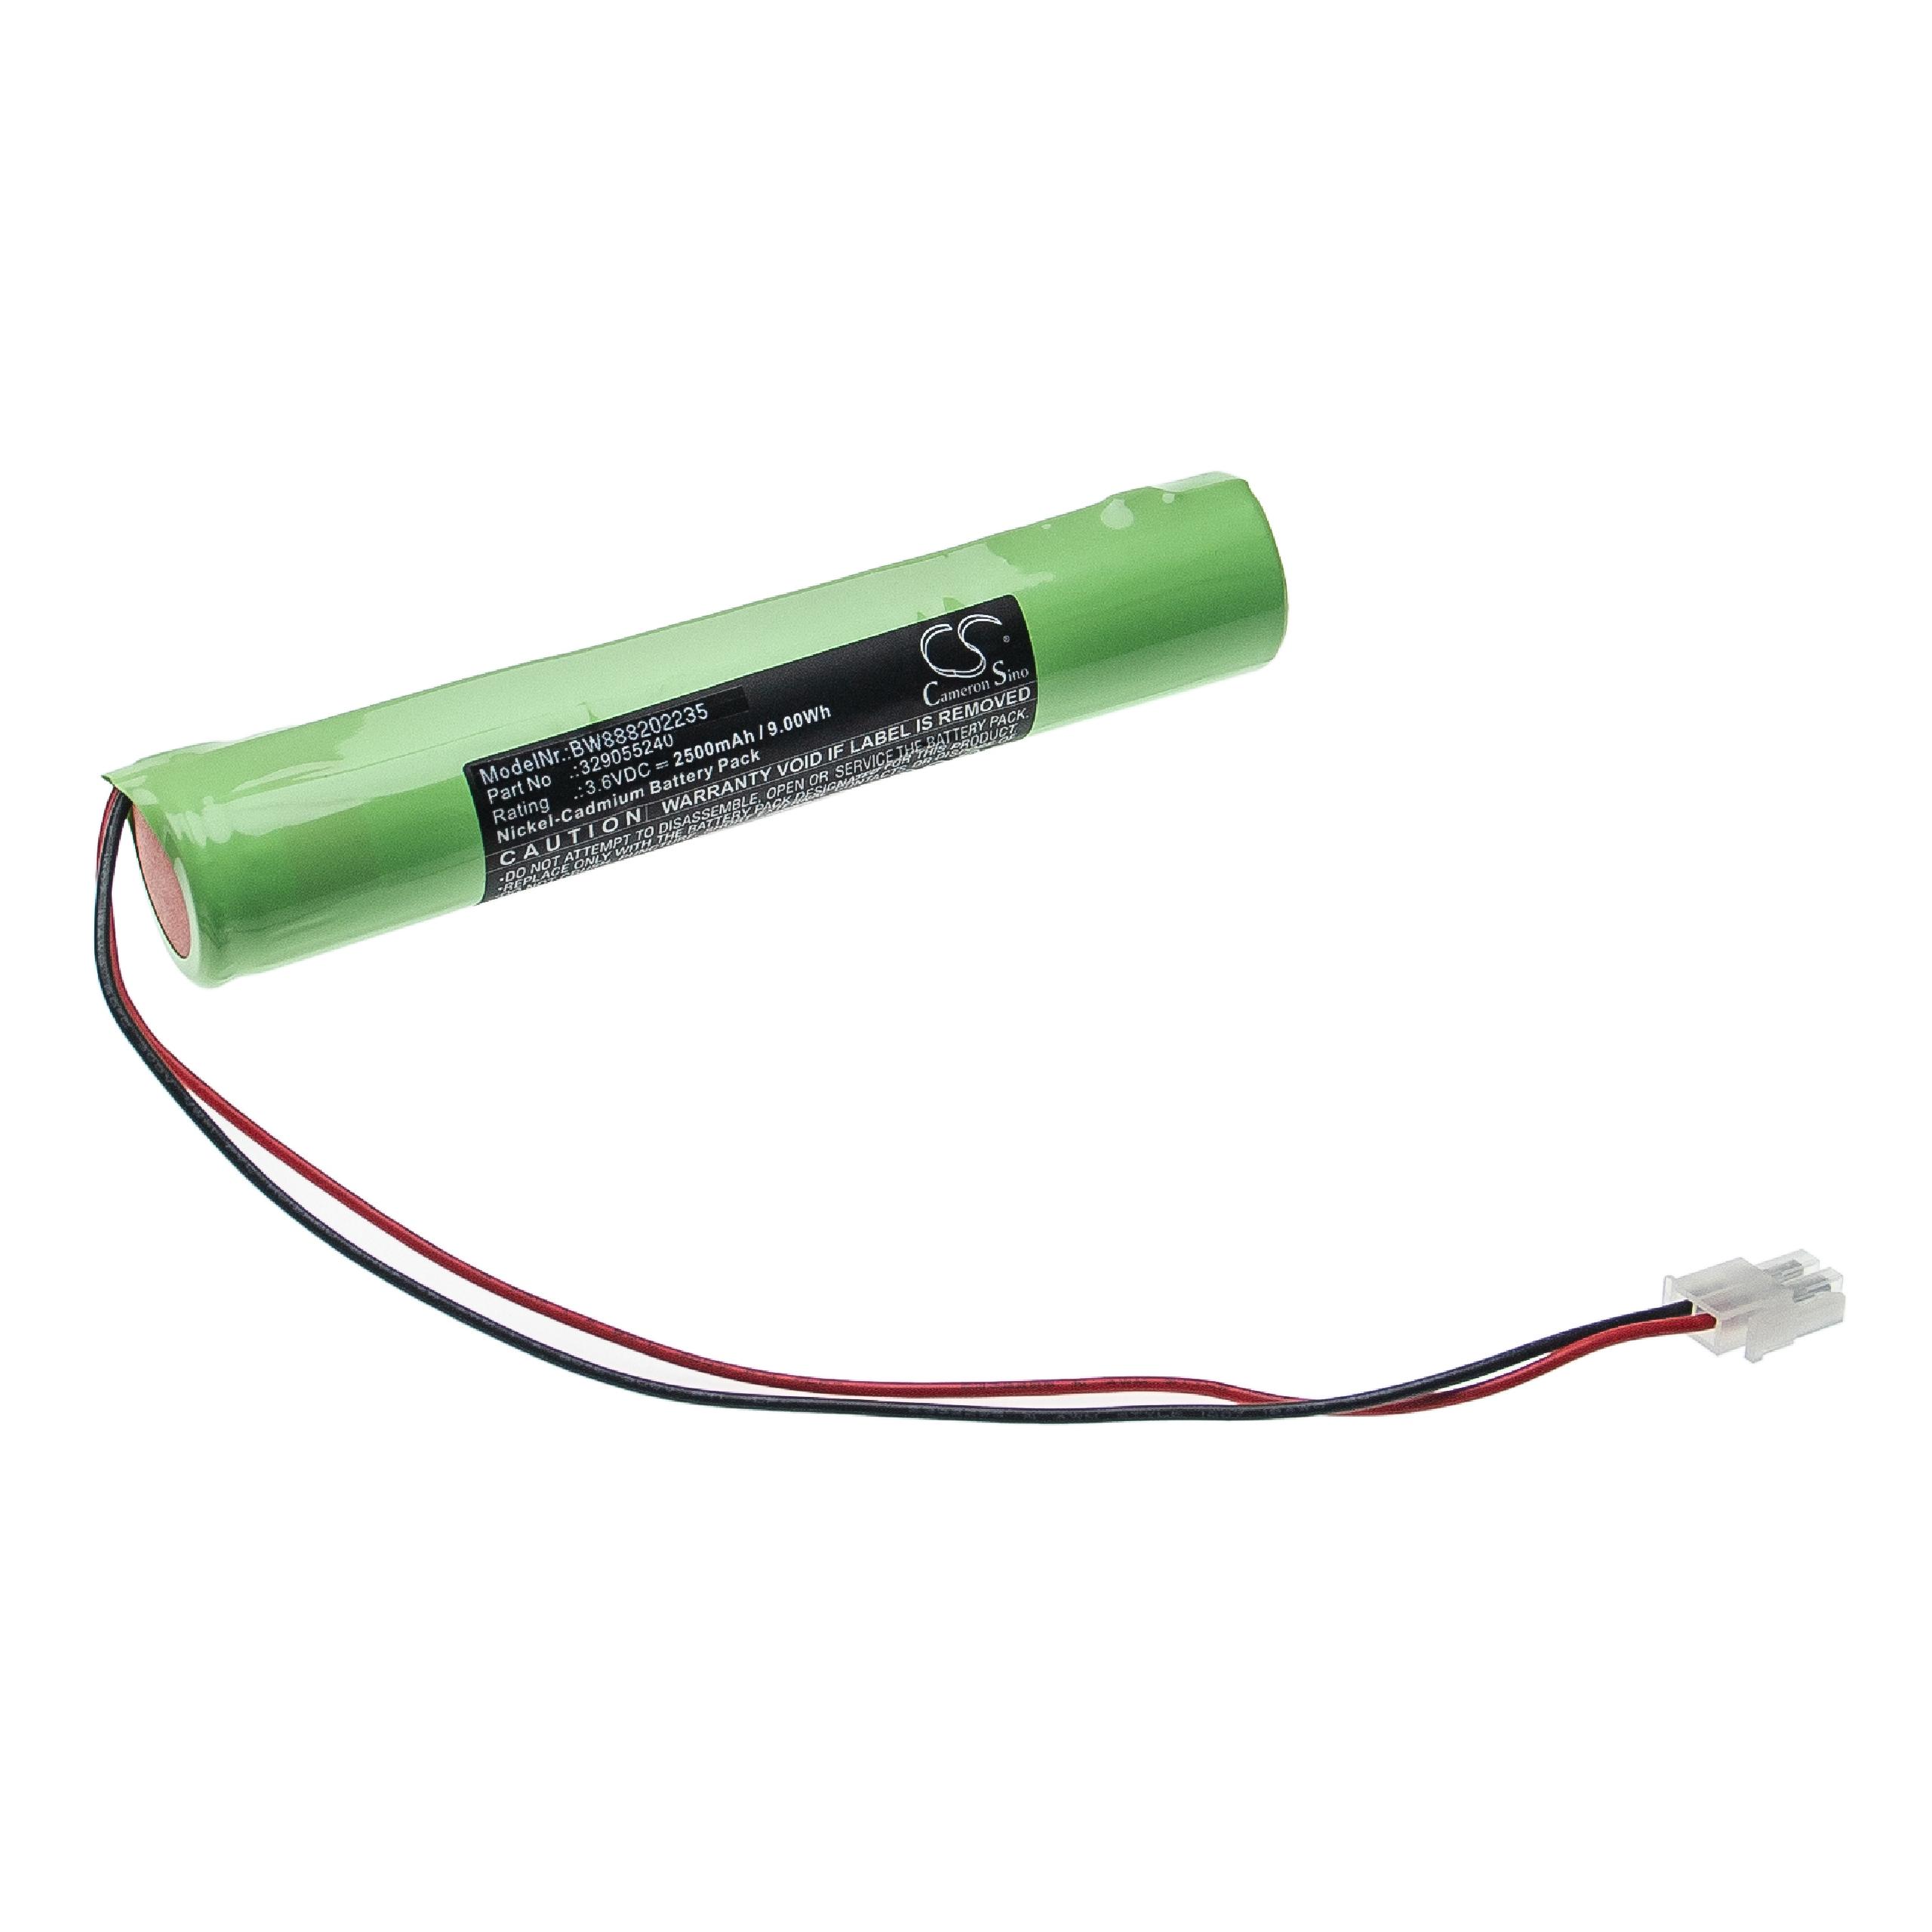 Emergency Light Battery Replacement for BAES 329055240 - 2500mAh 3.6V NiCd